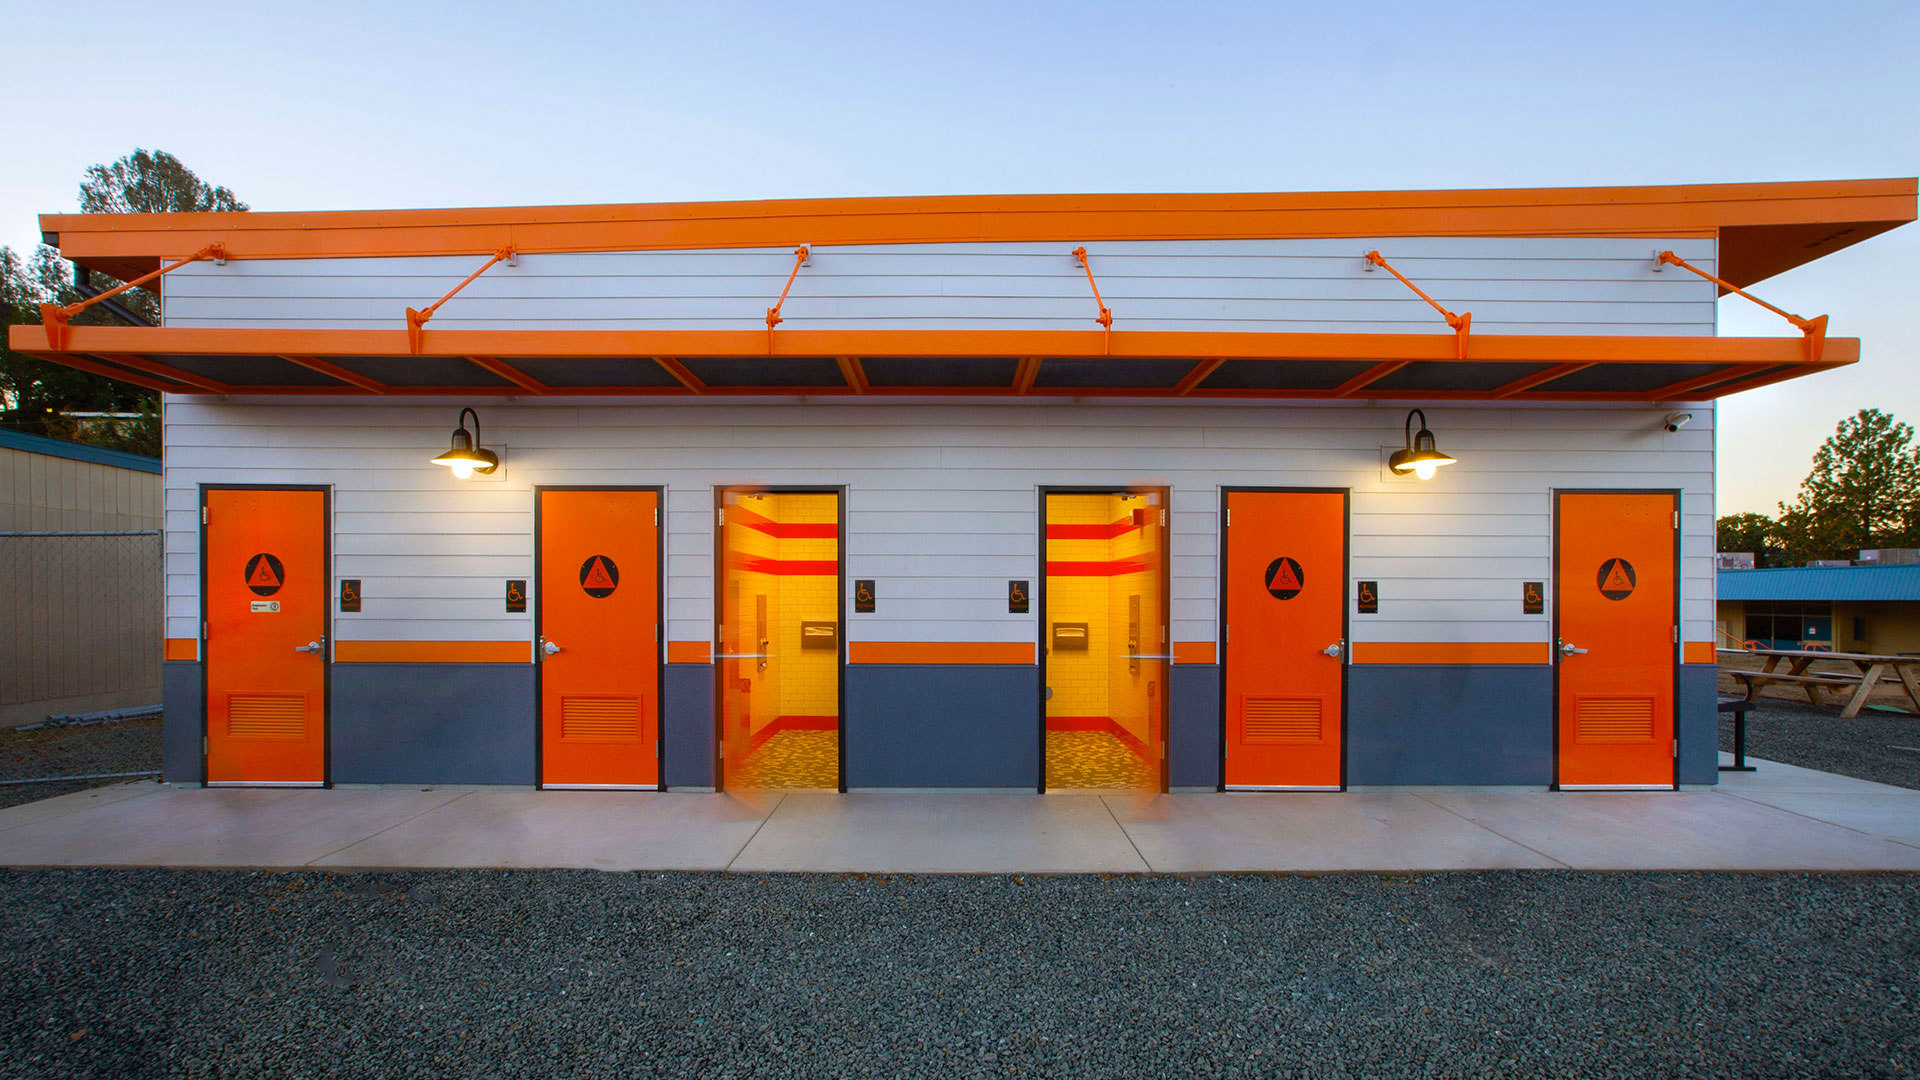 New modular restrooms, with orange doors and awning, on side of classrooms wing.